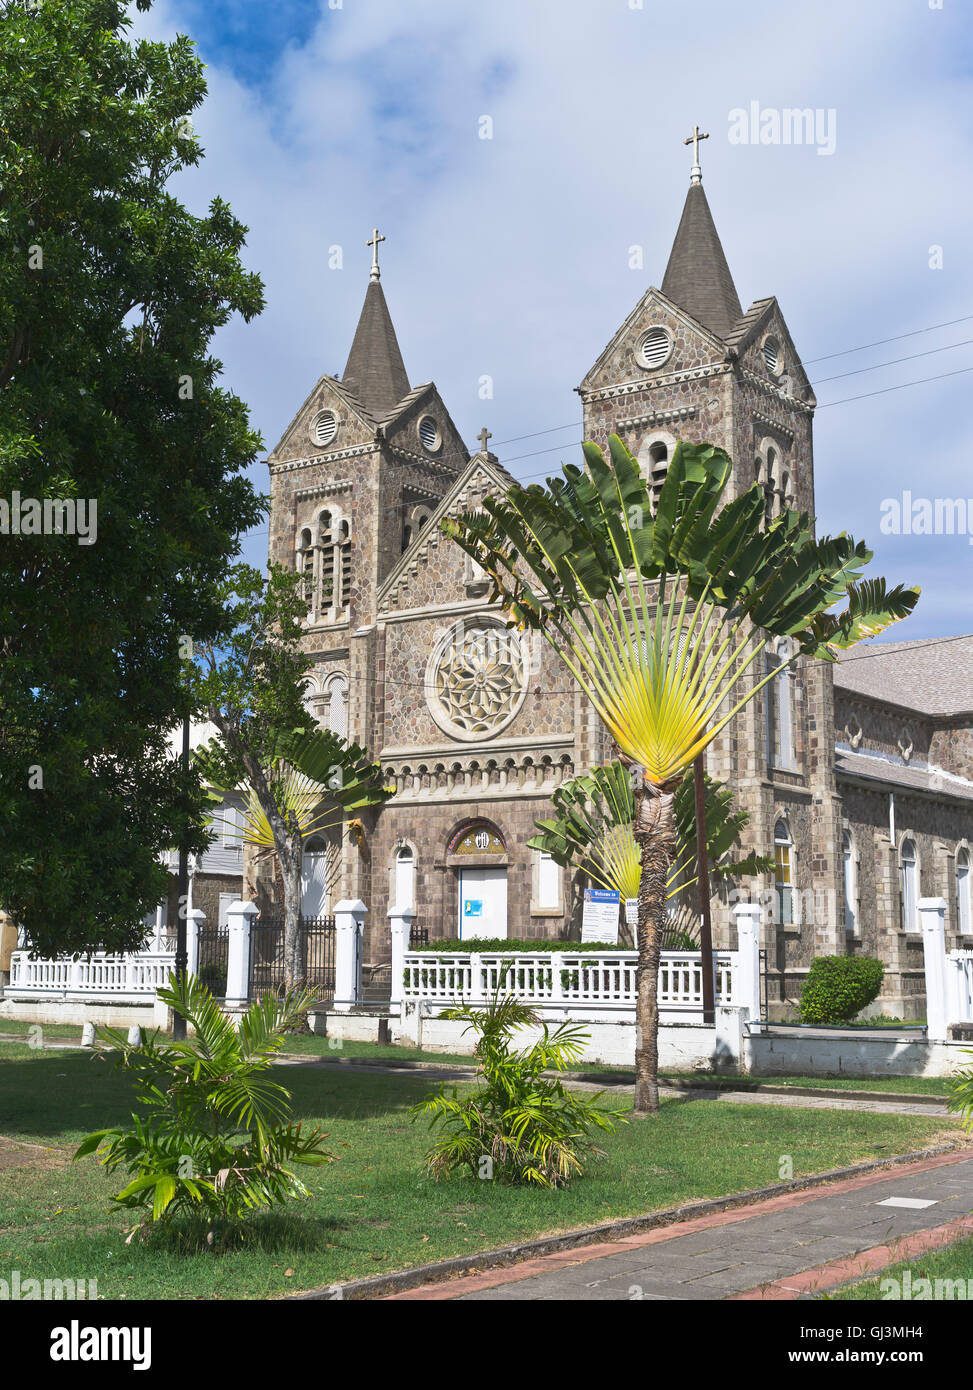 dh Basseterre ST KITTS CARIBBEAN Independence Square cattedrale di immacolata concezione Foto Stock